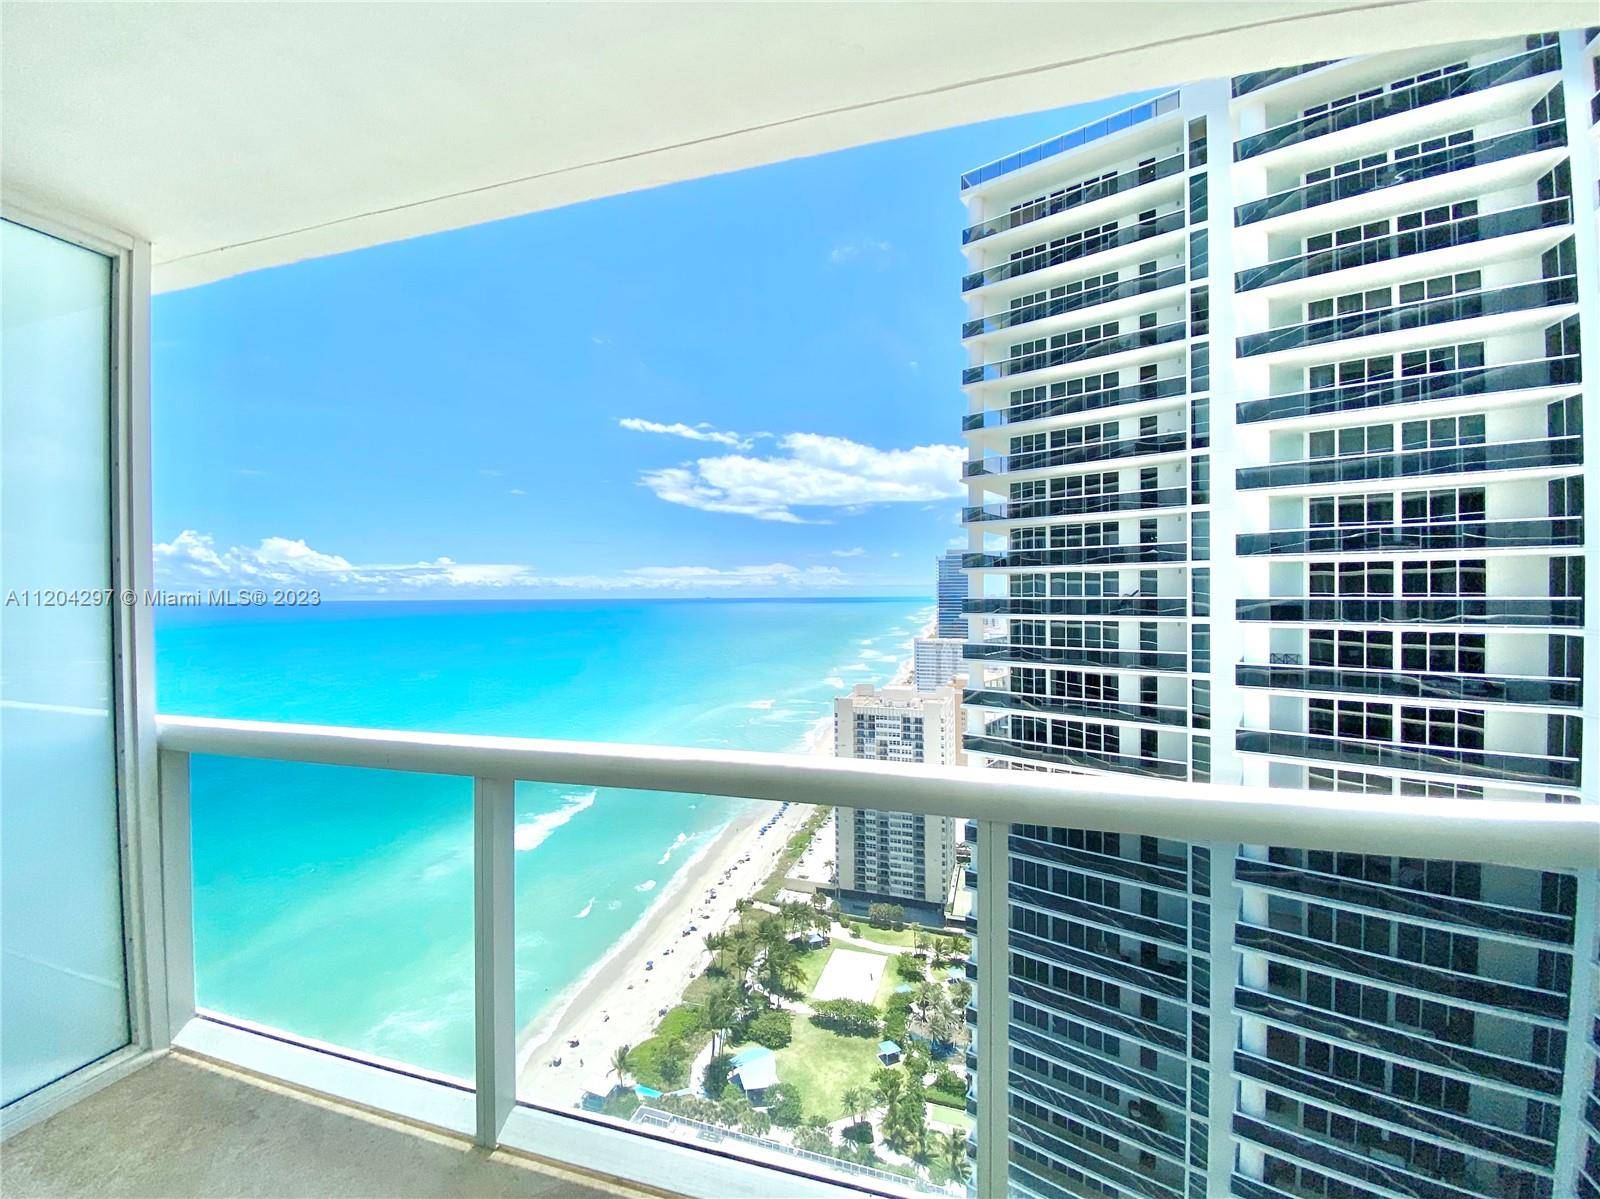 BEAUTIFUL AND FULLY FURNISHED 1 BD DEN, 1 BATH APARTMENT IN THE FAMOUS BEACH CLUB TWO.